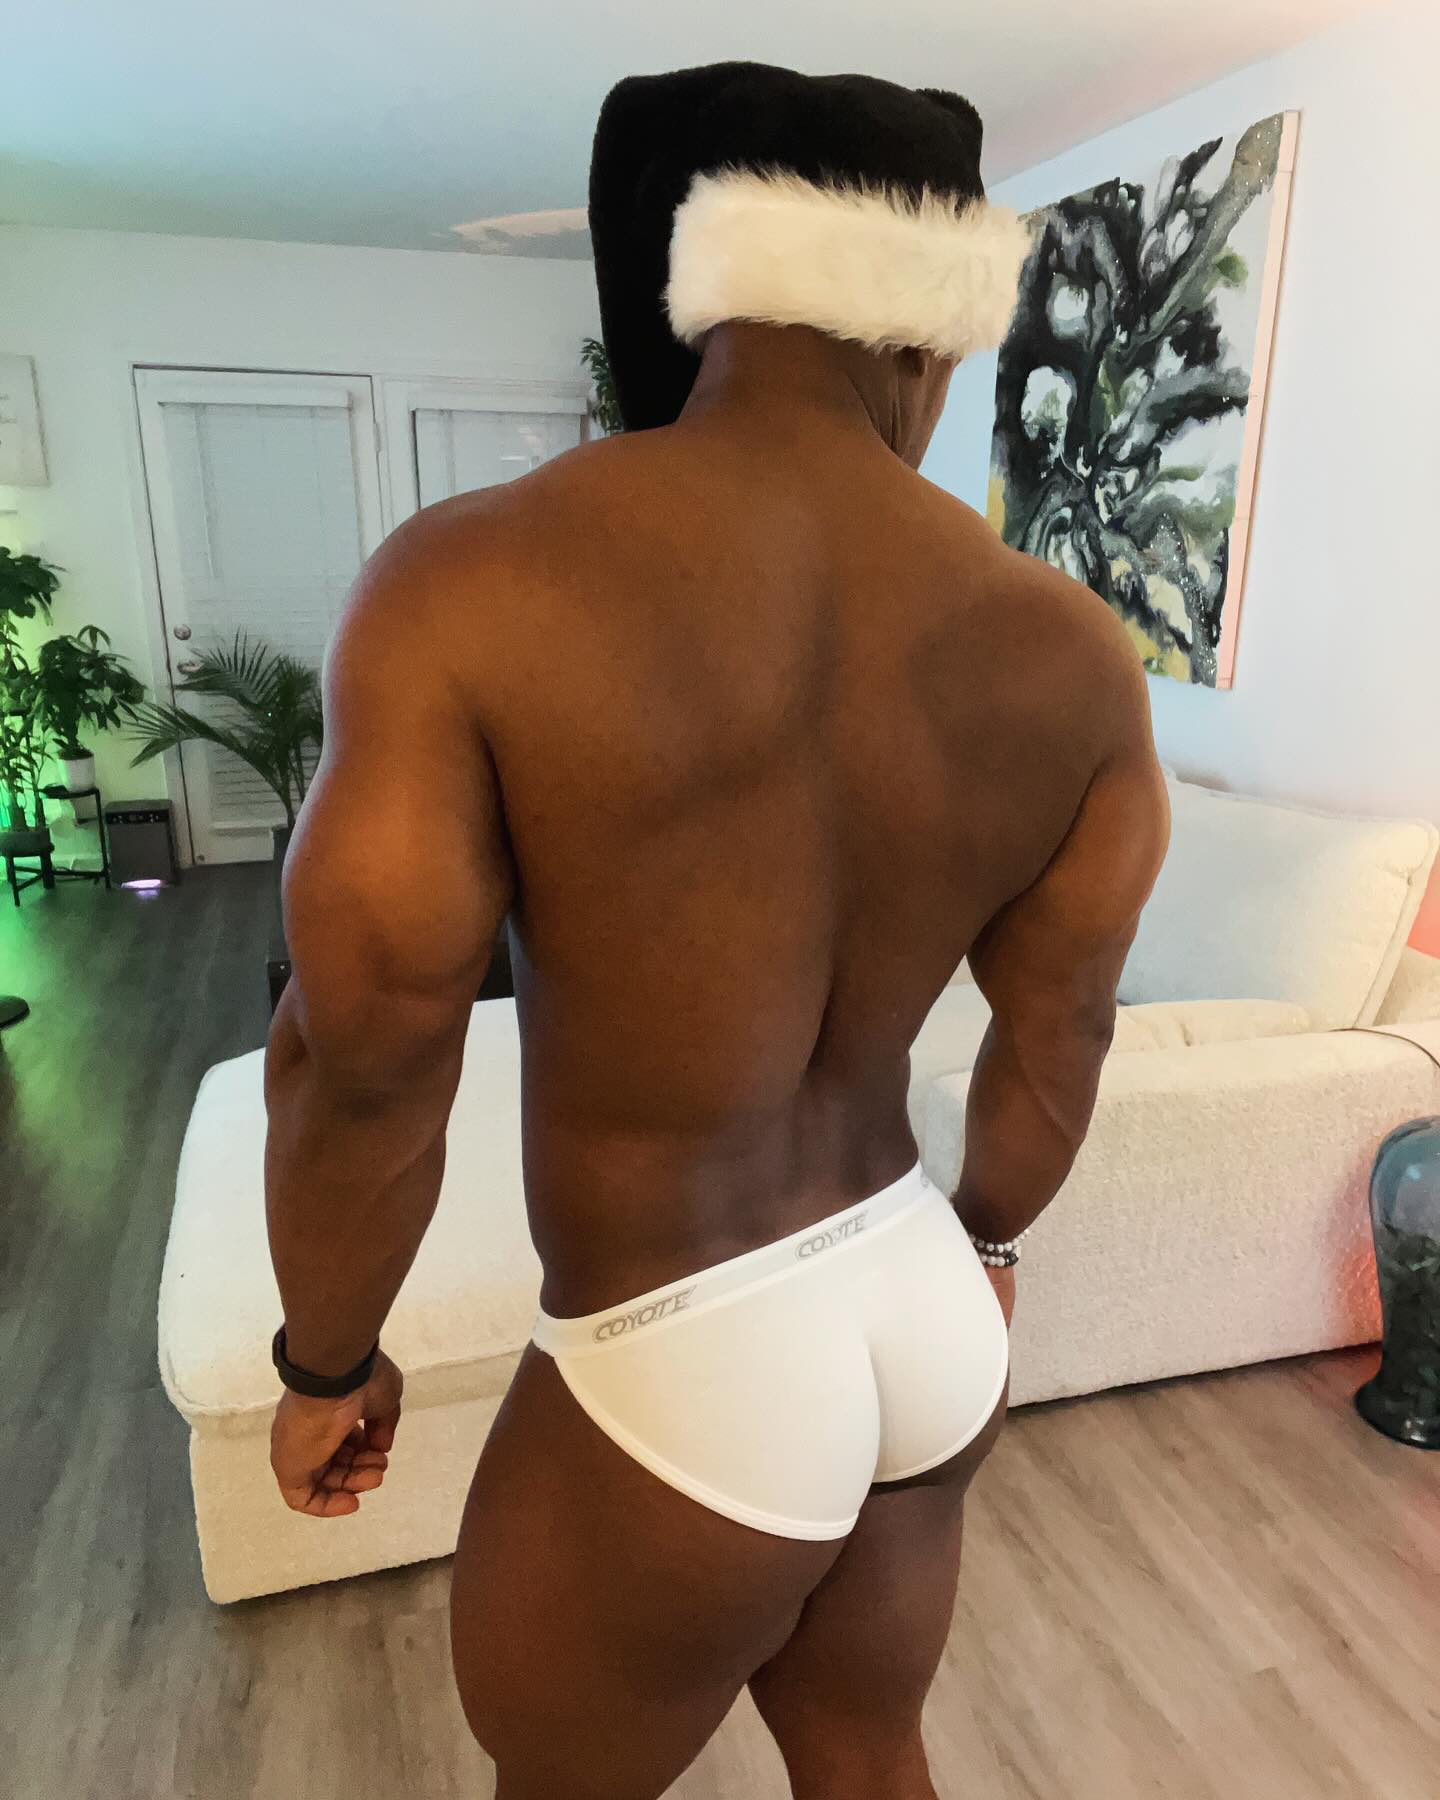 Happy holidays! 😮‍💨🫶🏾🎅🏾 Feelin’ some kind of way wearing these @coyotejocks briefs 😏